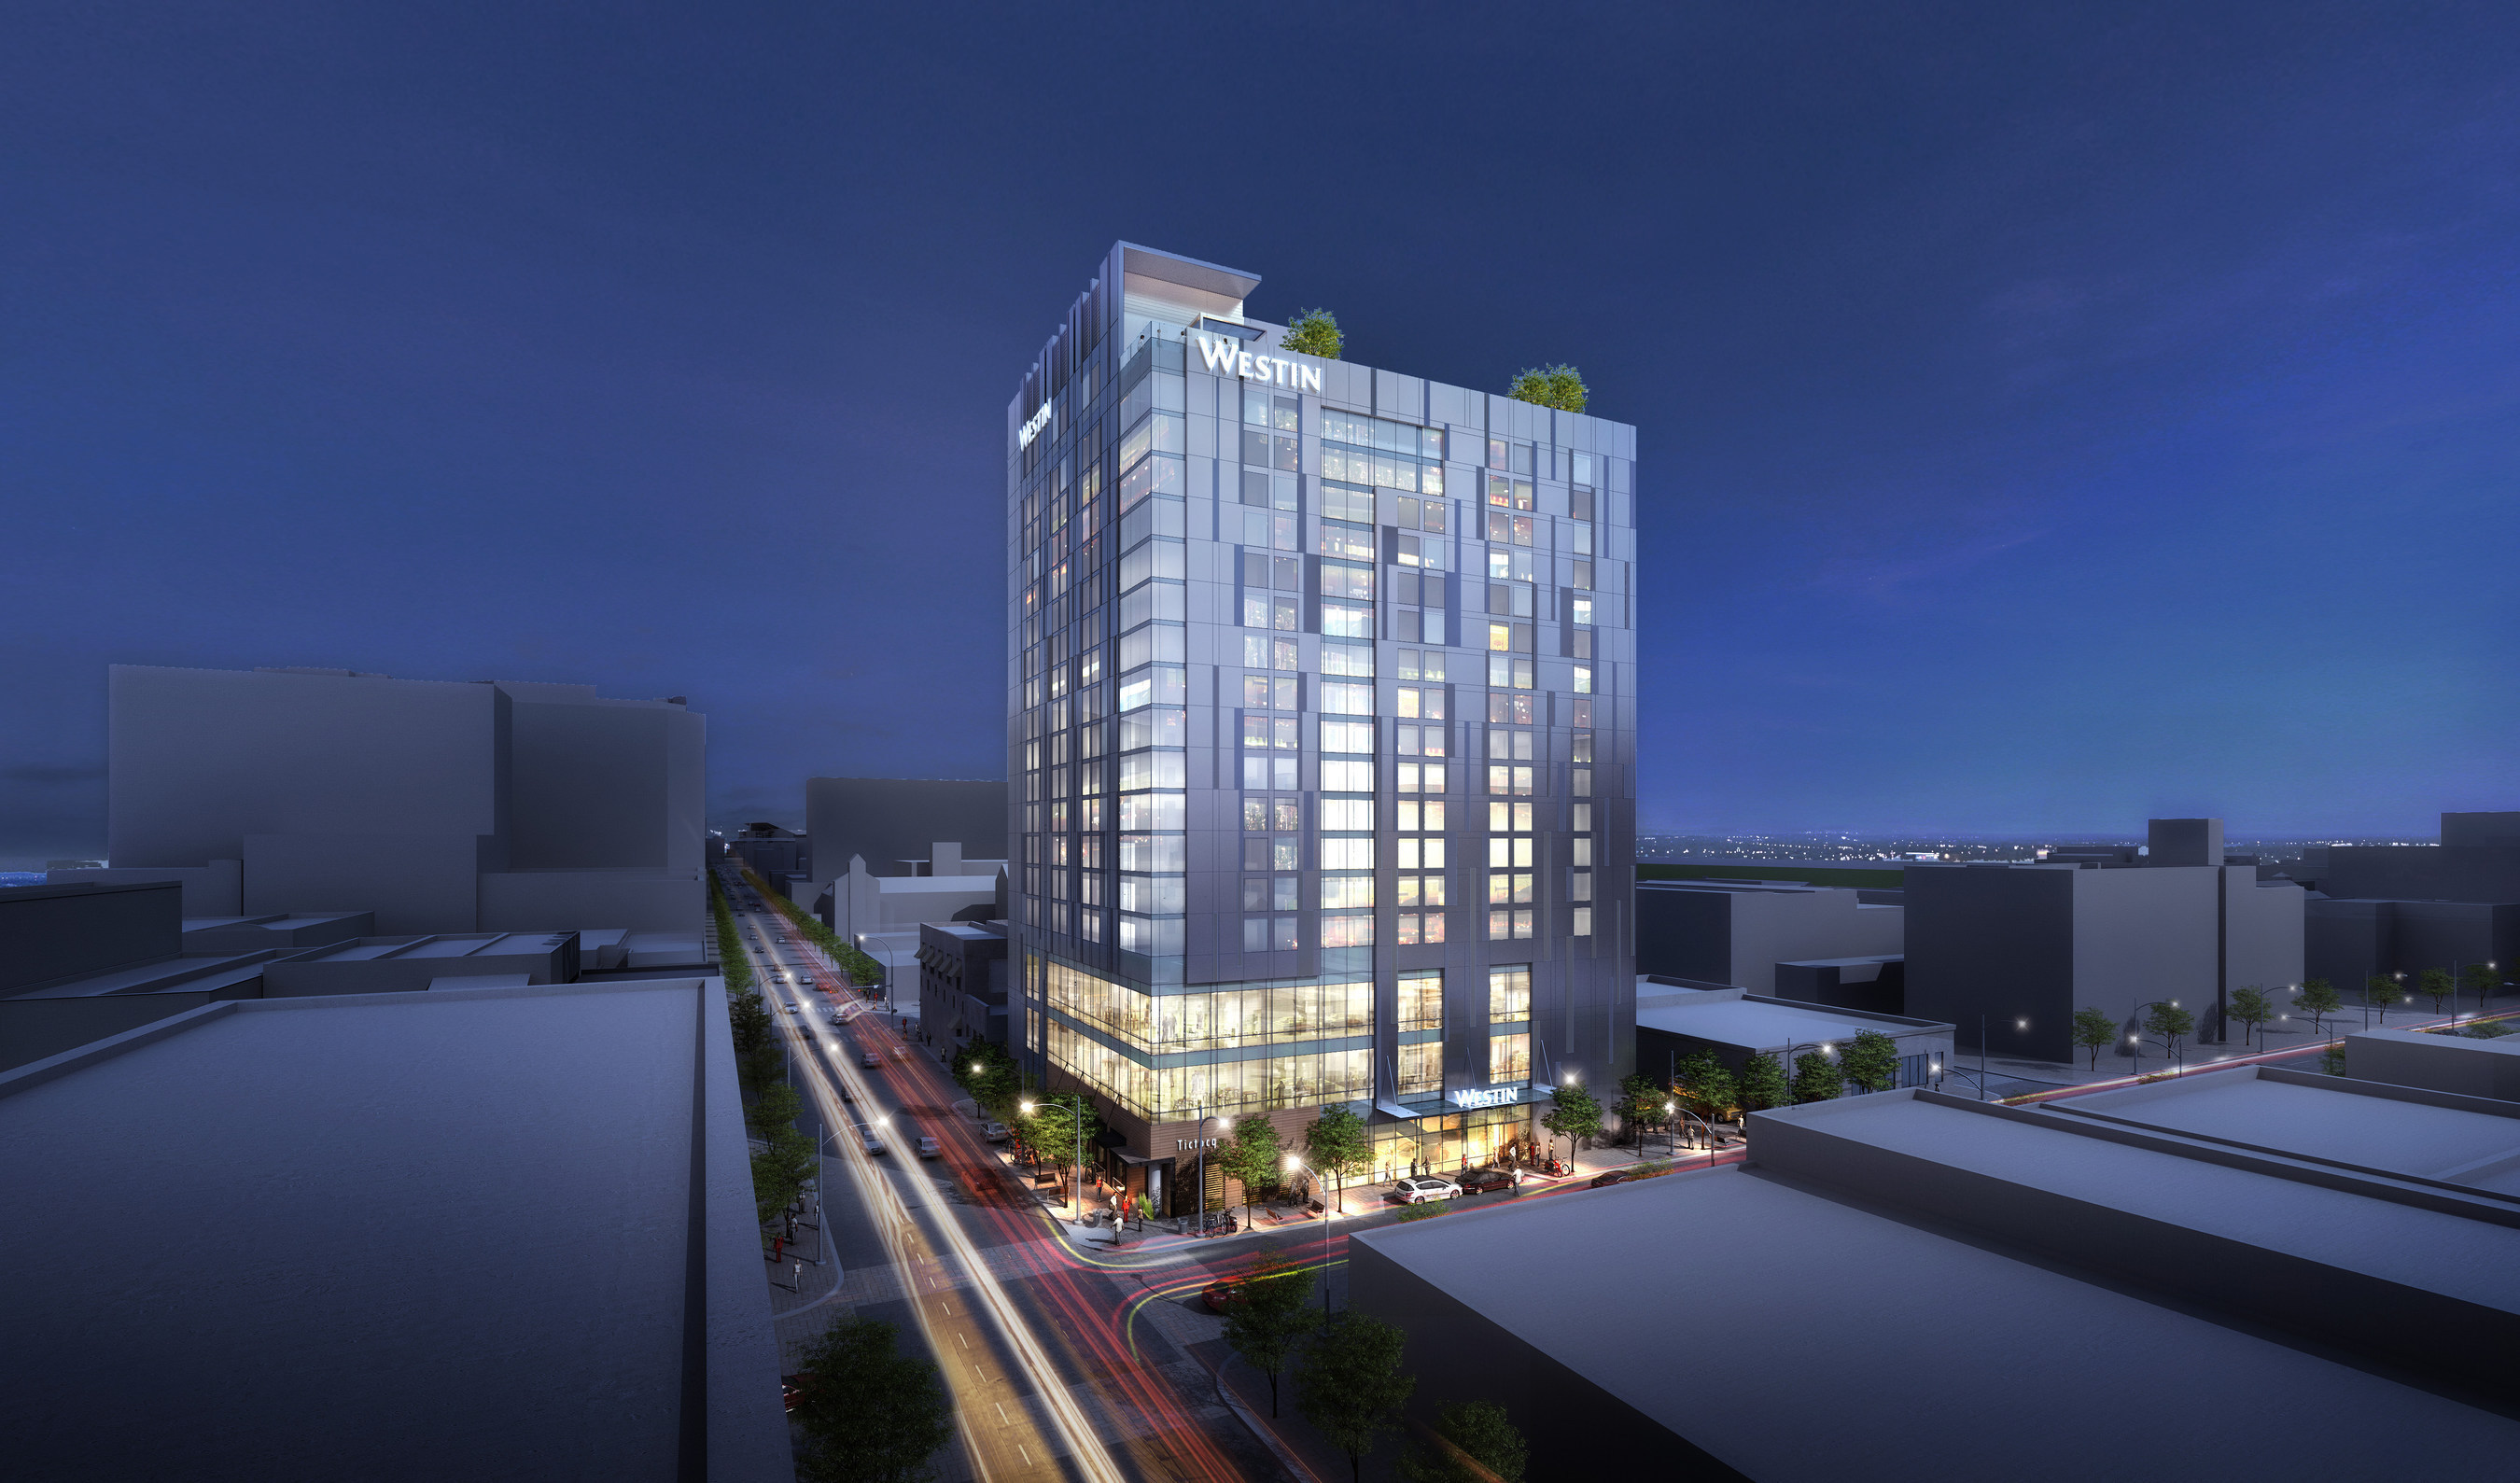 The Westin Austin Downtown completed its structural construction, celebrating its Topping Out Tuesday. The hotel is scheduled to open in Summer 2015.